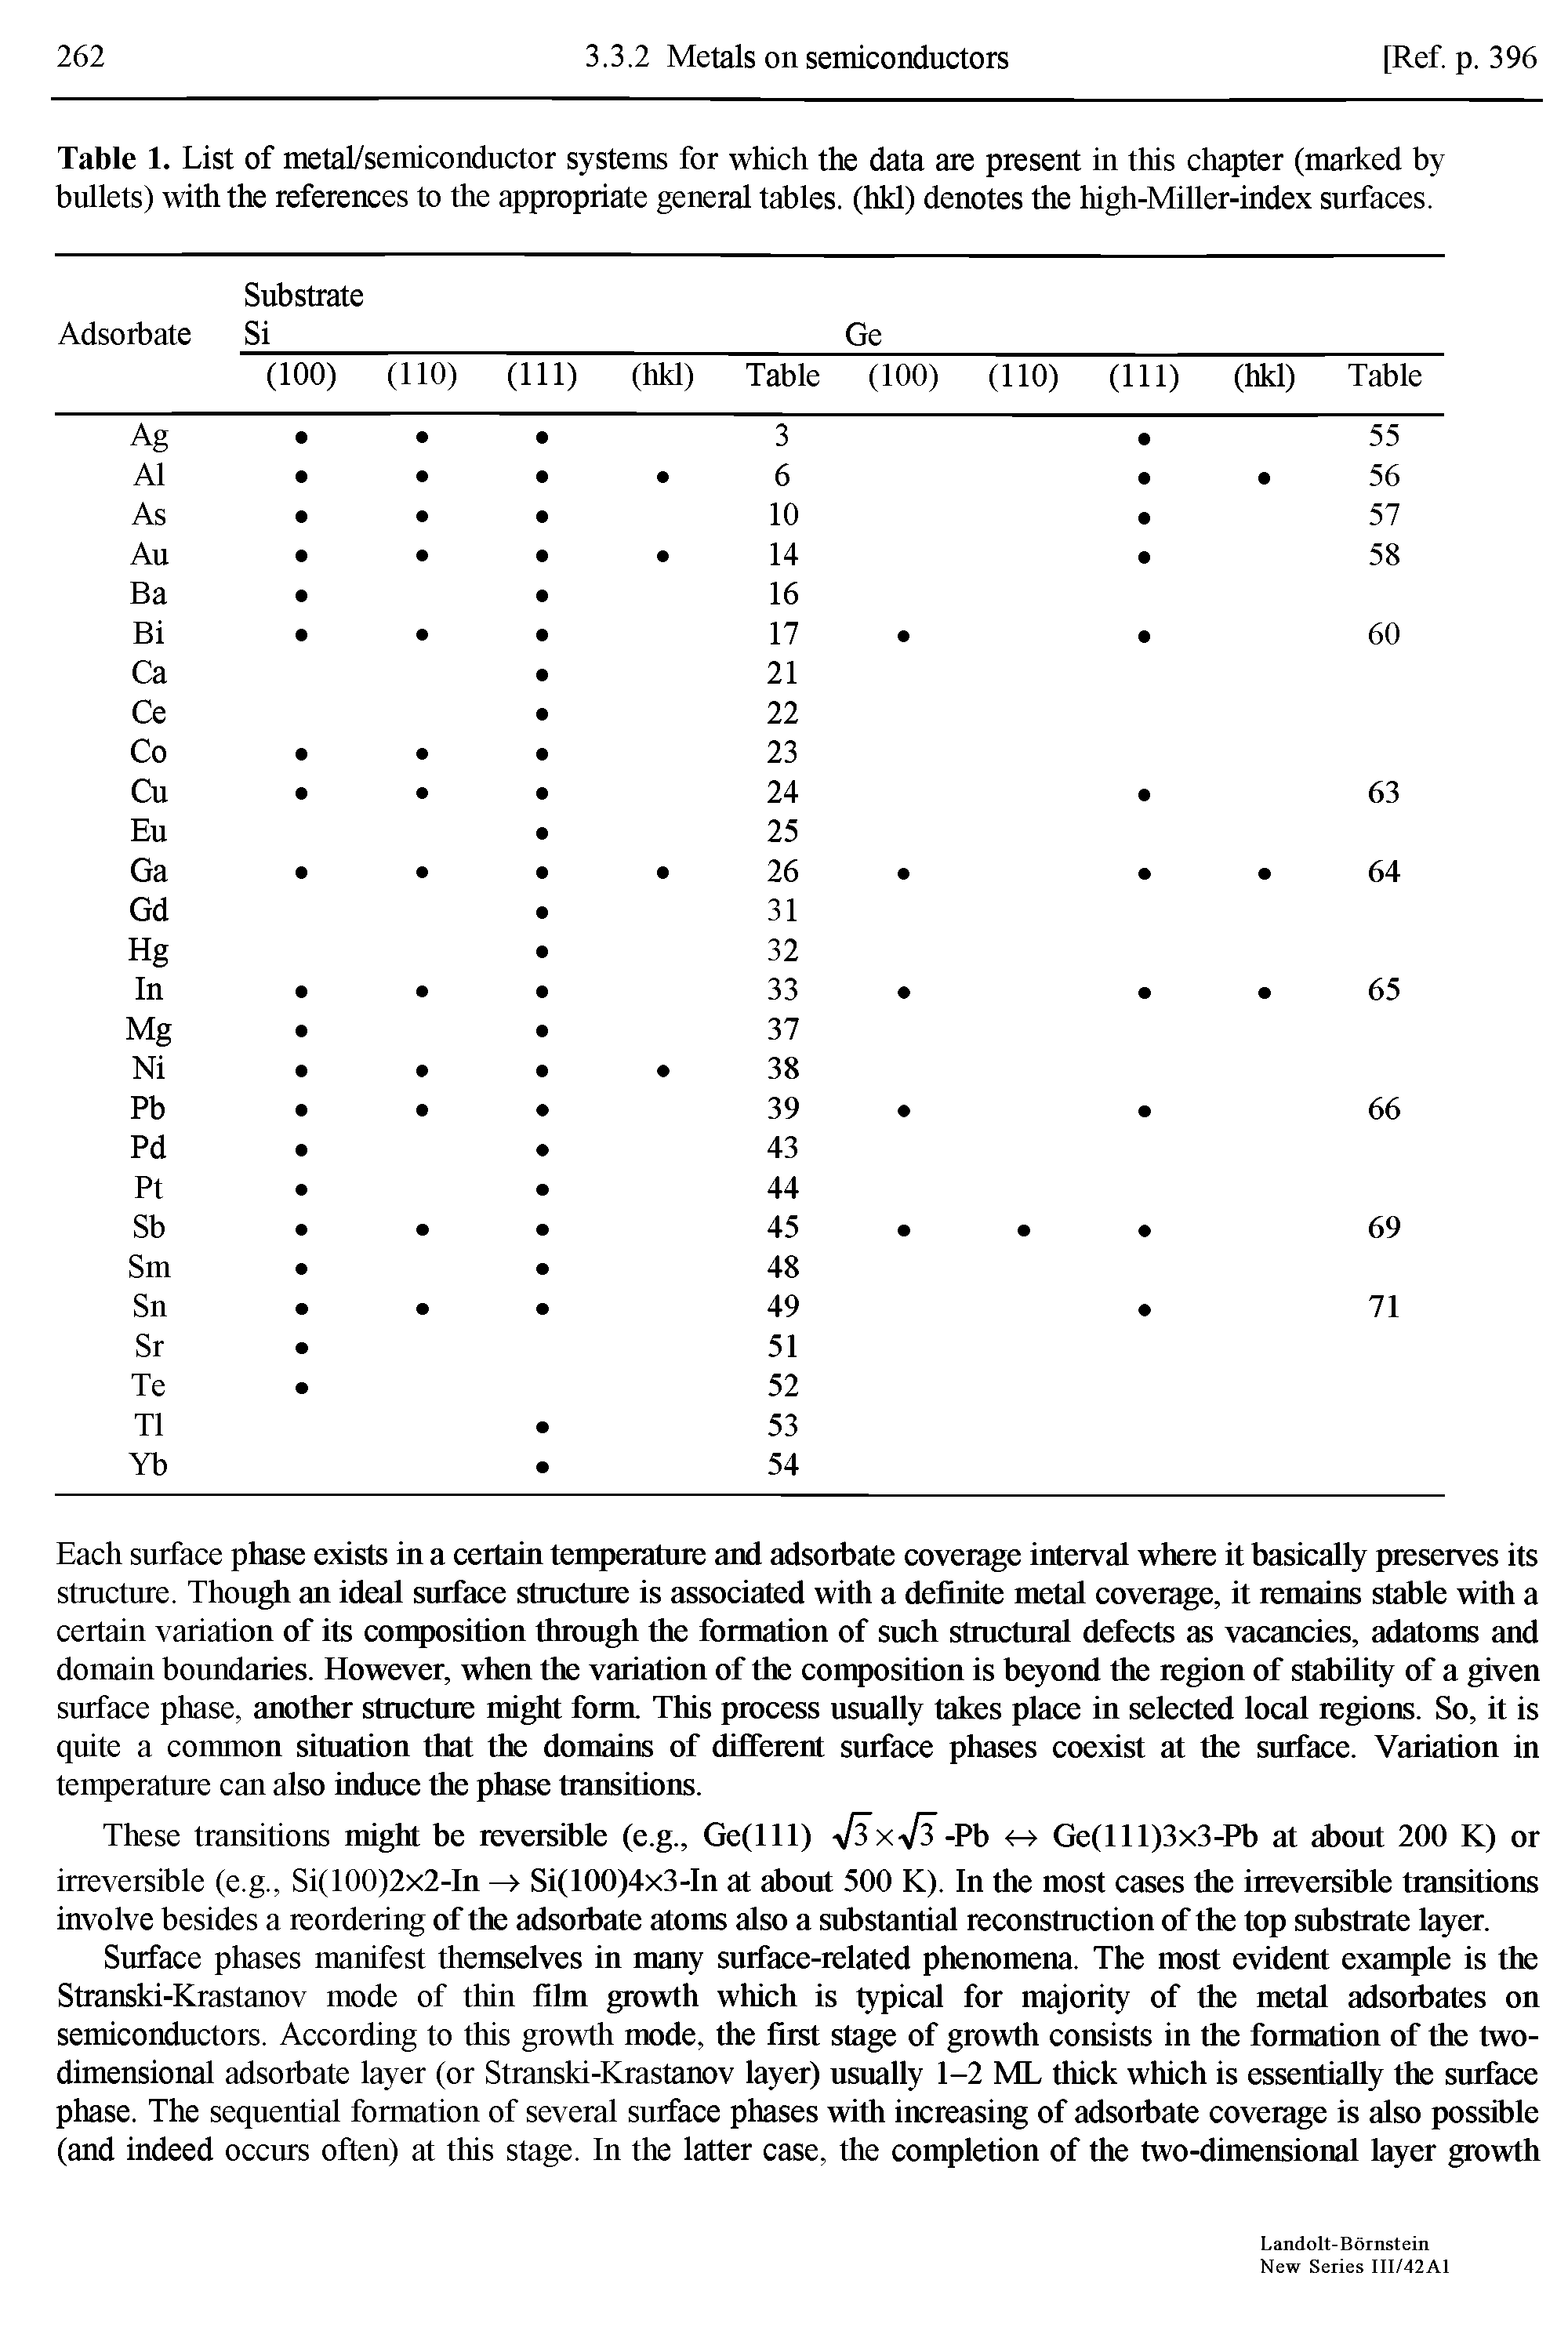 Table 1. List of metal/semiconductor systems for which the data are present in this chapter (marked by bullets) with the references to the appropriate general tables, (hkl) denotes the high-Miller-index surfaces.